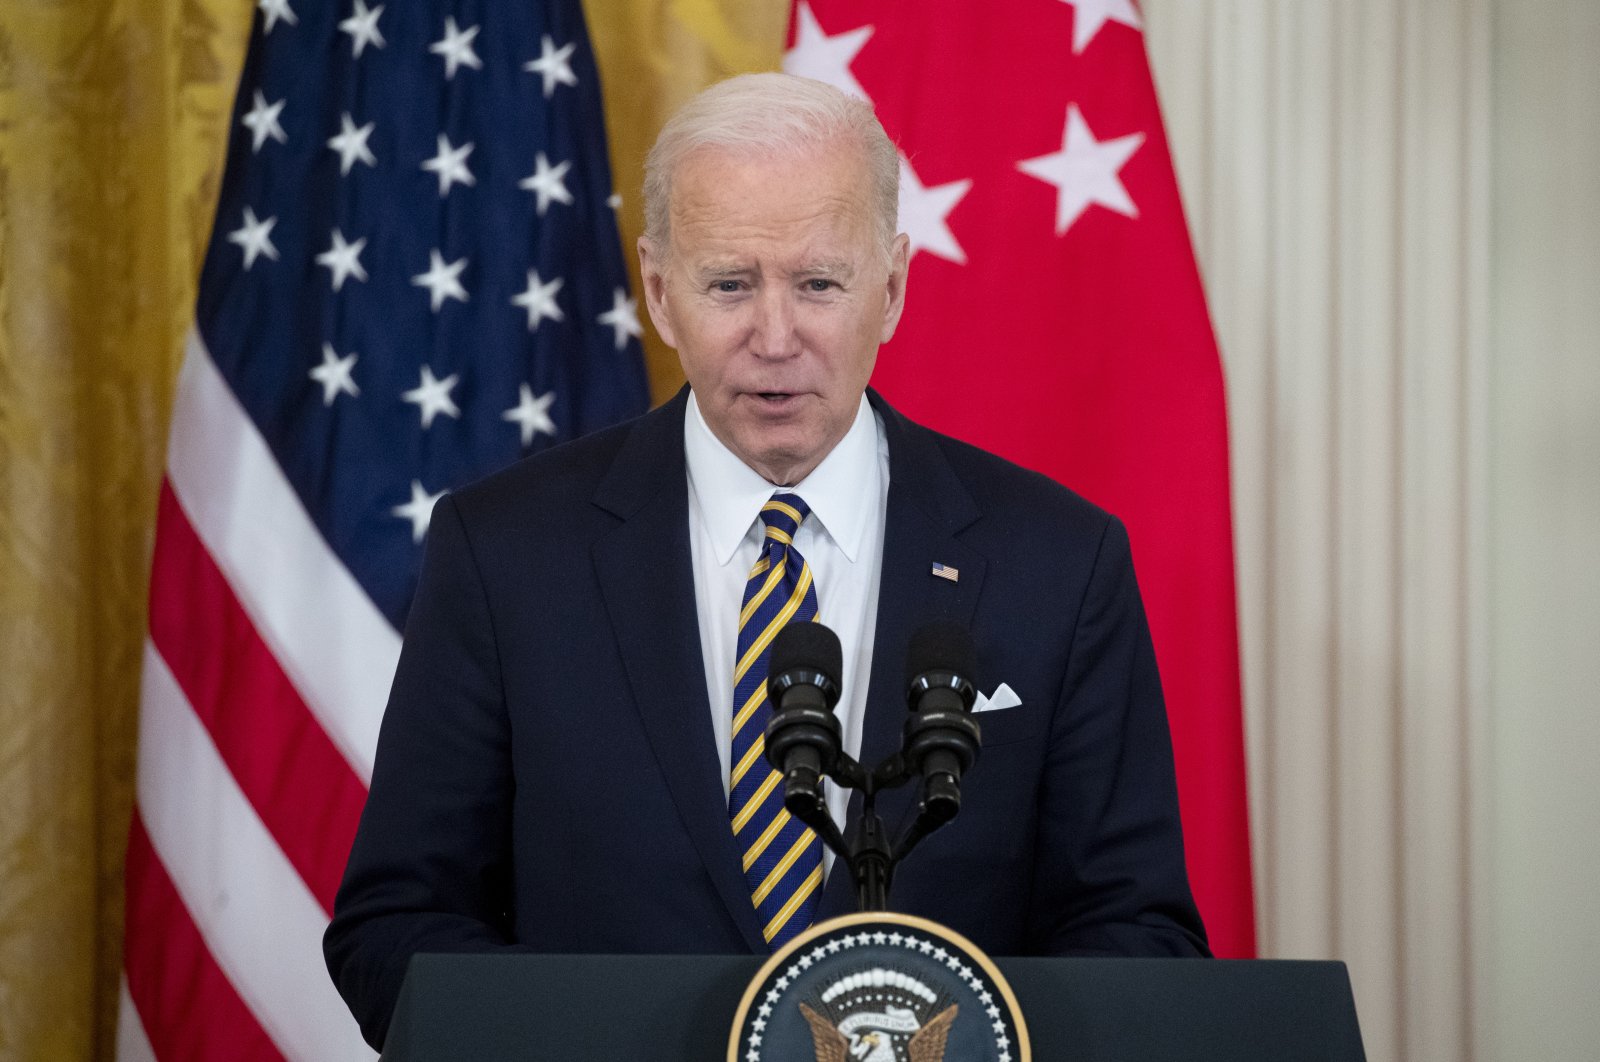 U.S. President Joe Biden speaks beside Prime Minister Lee Hsien Loong (not pictured) of Singapore as they make a joint press statement in the East Room of the White House in Washington, U.S., March 29, 2022. (EPA)